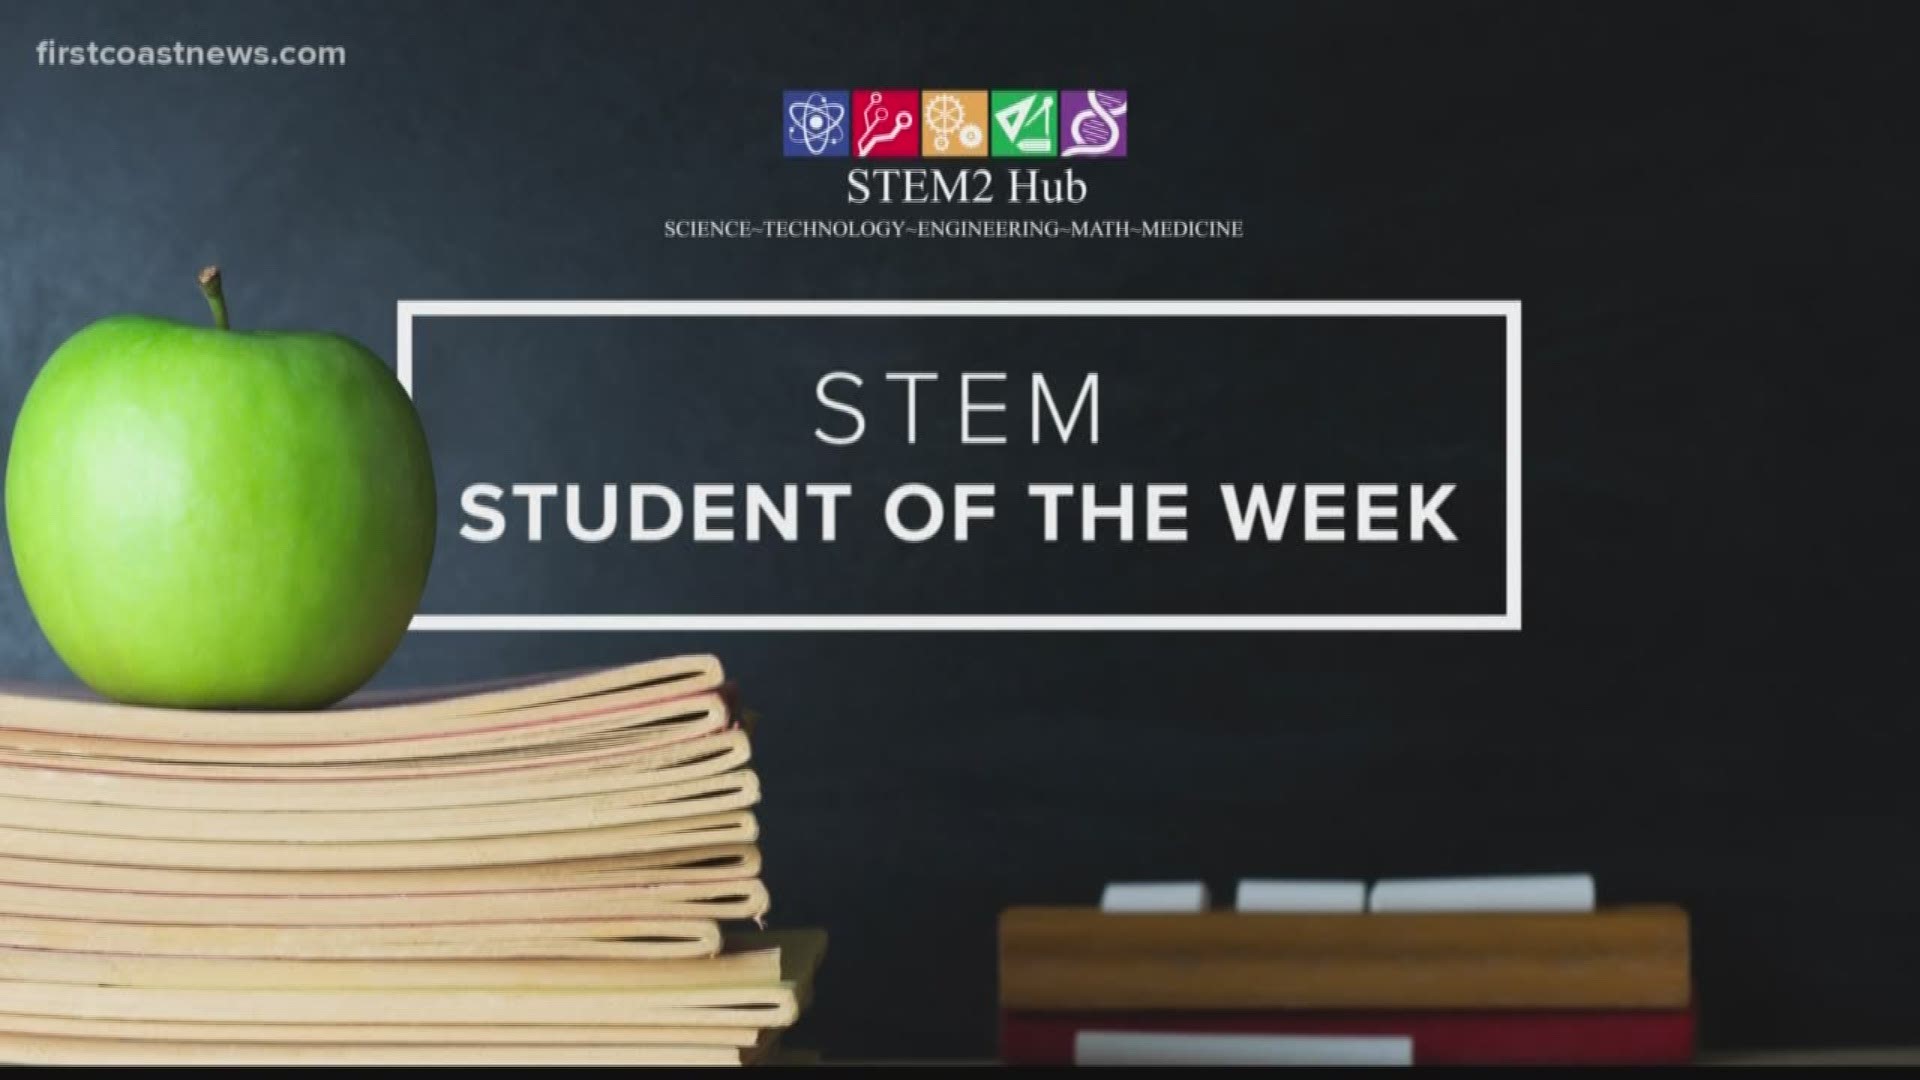 Congratulations to our STEM student of the week.